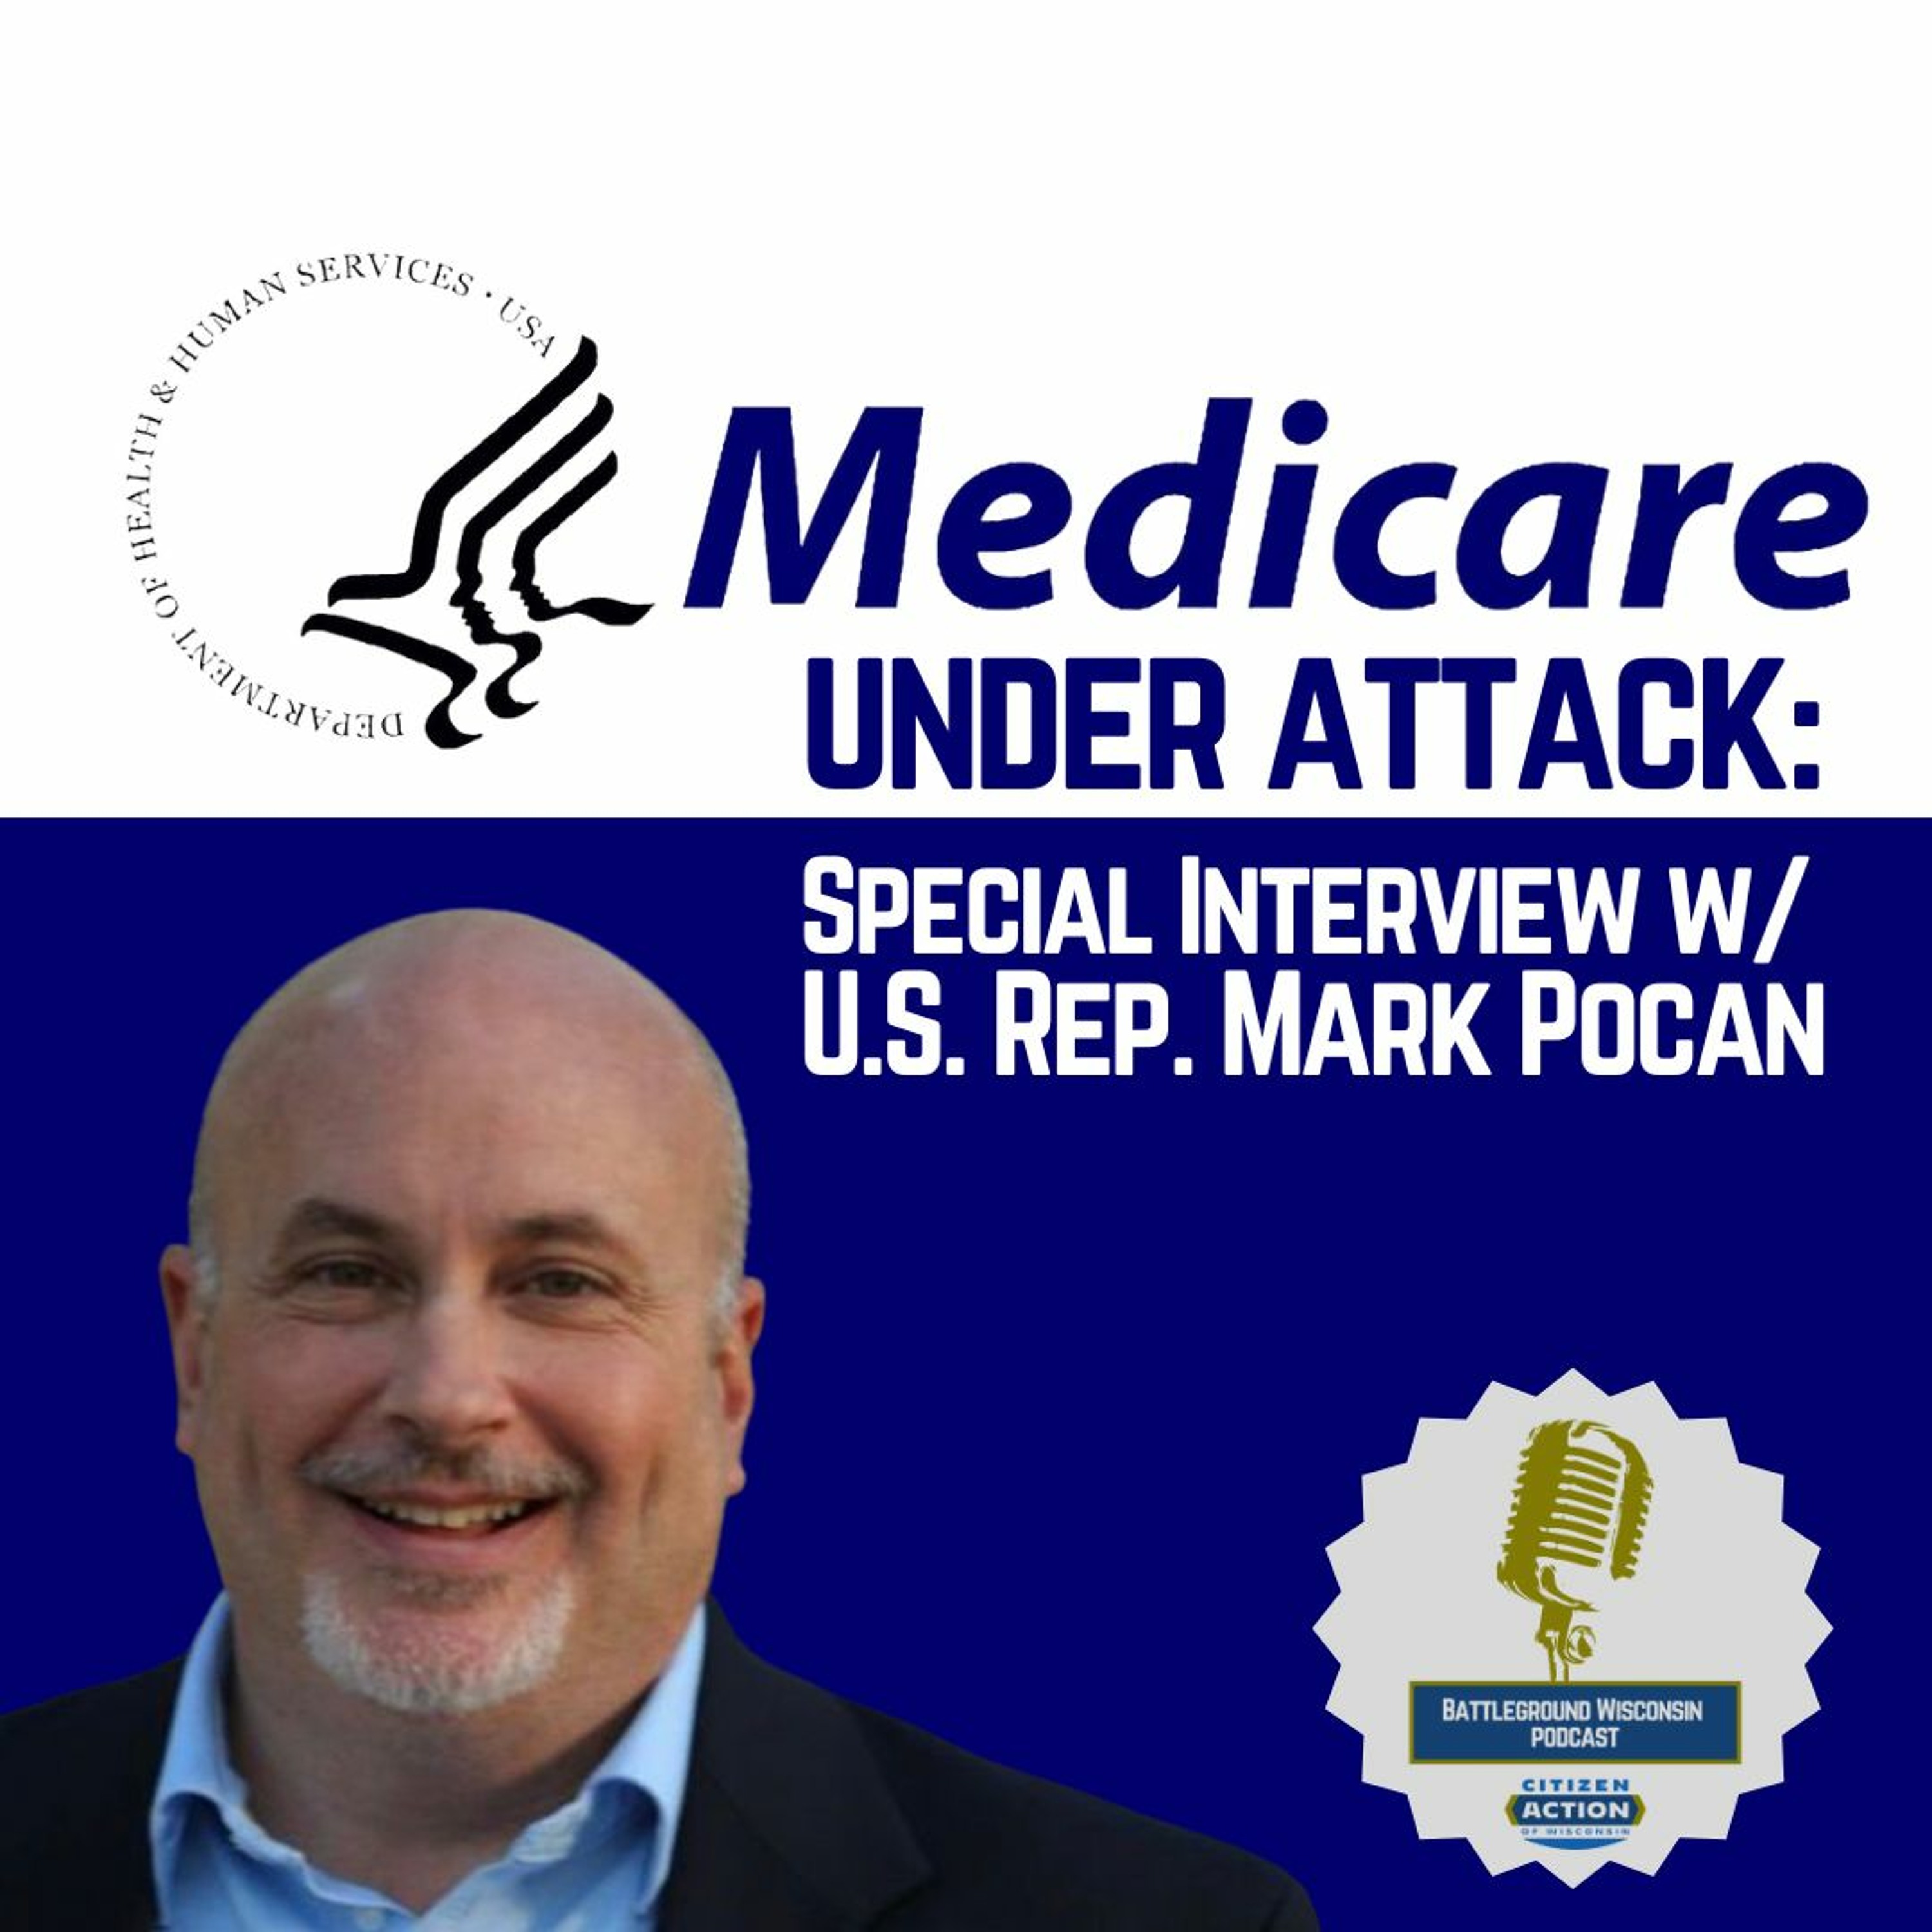 Medicare under attack: Special Interview with U.S. Rep. Mark Pocan